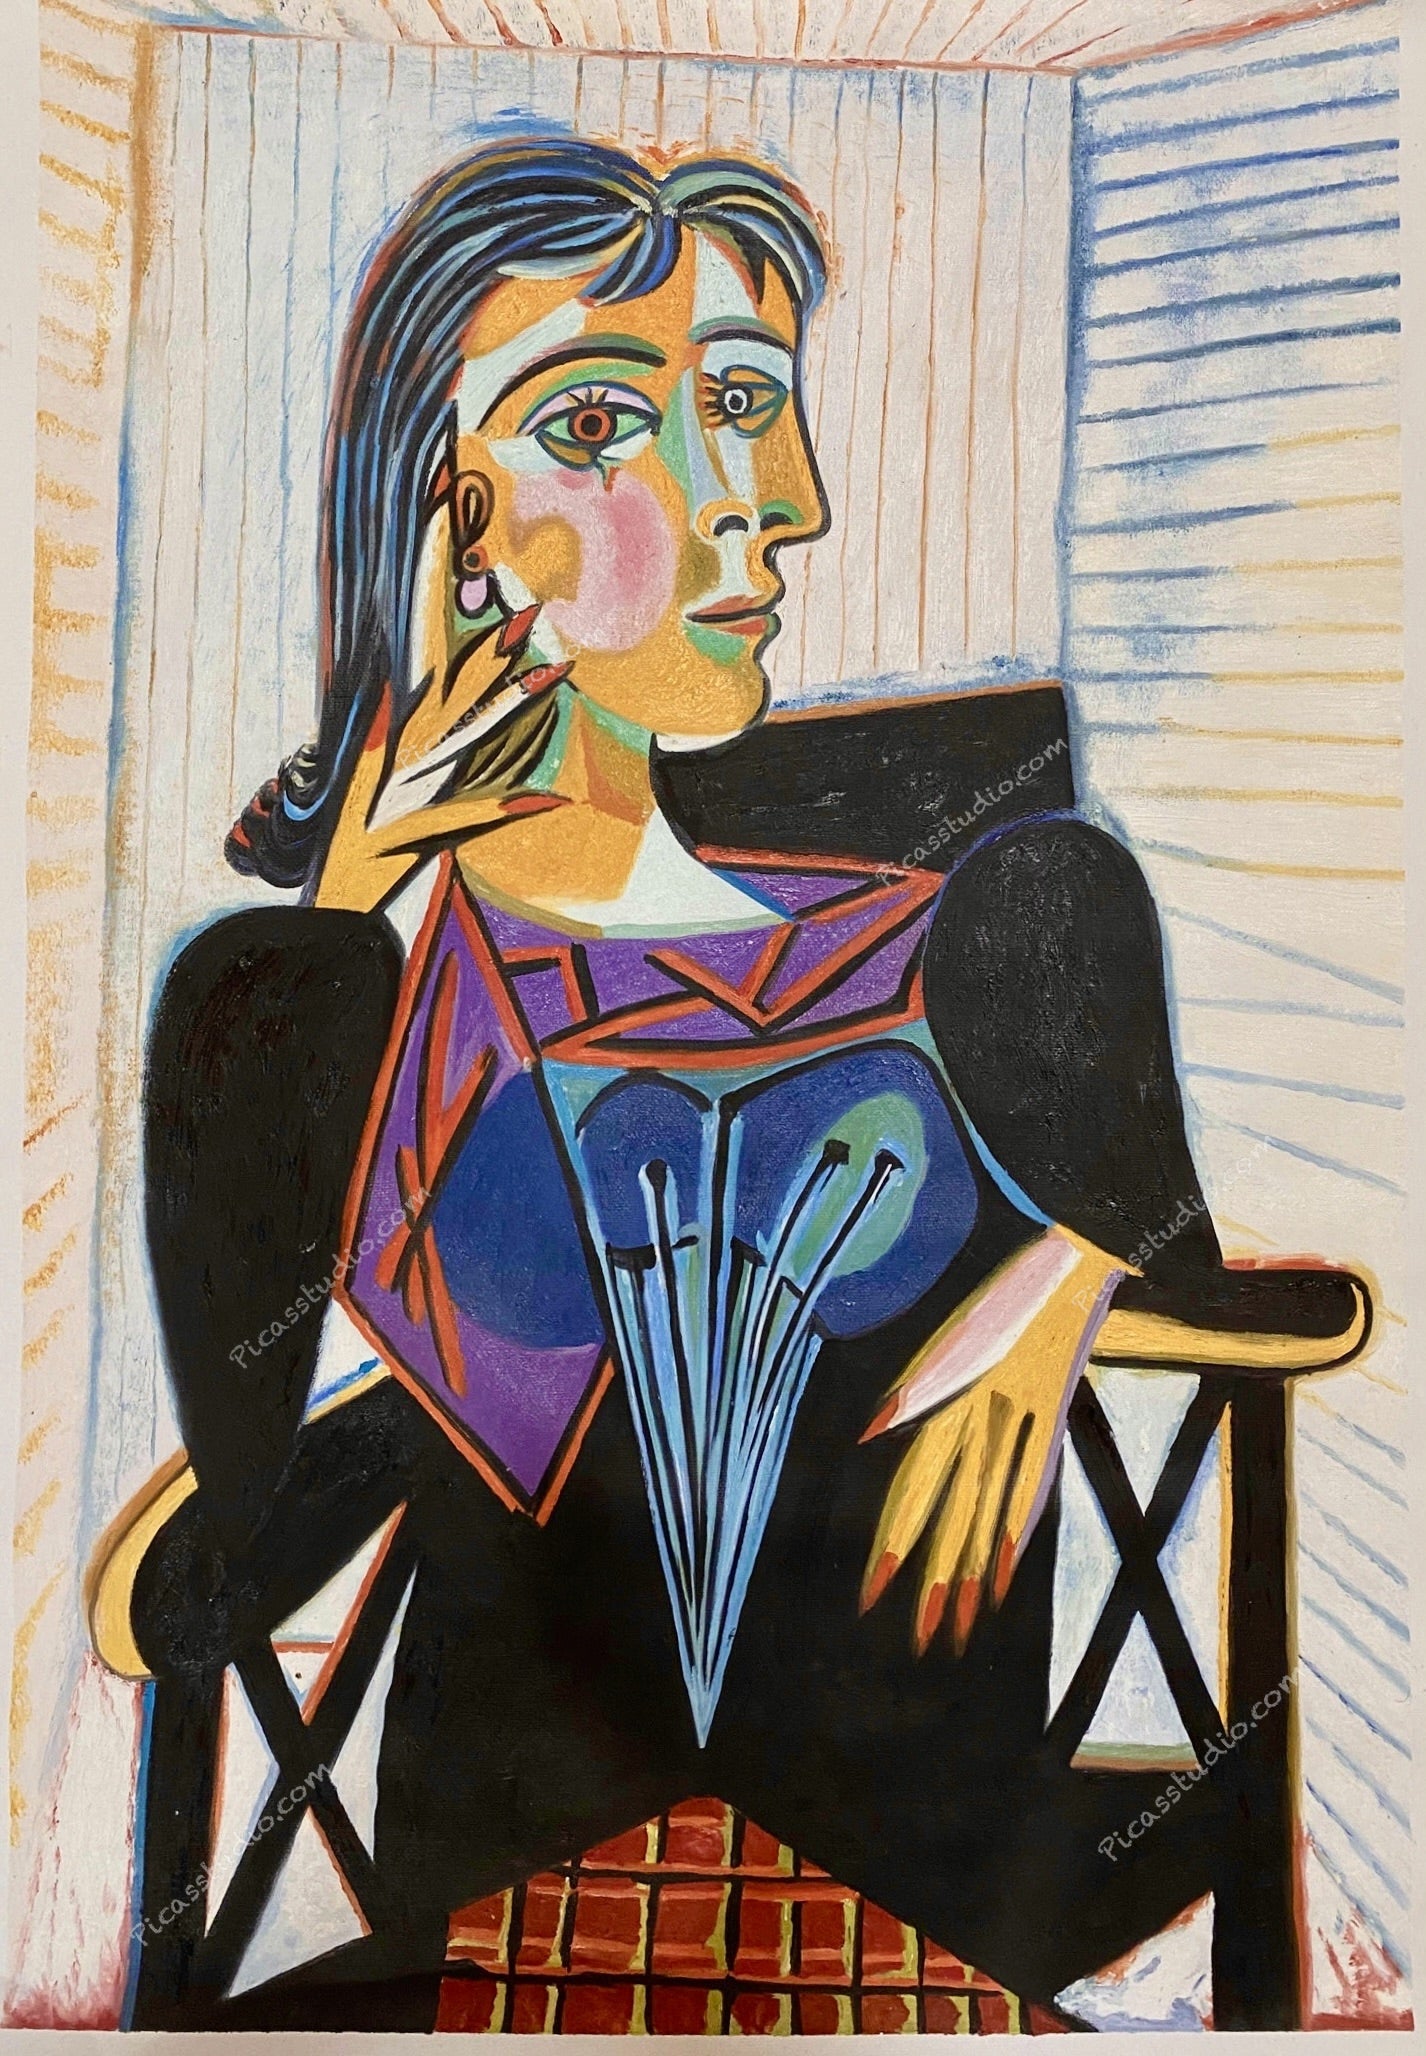 Pablo Picasso Portrait of Dora Maar, Chair Oil Painting Hand Painted Art on Canvas Wall Decor Unframed